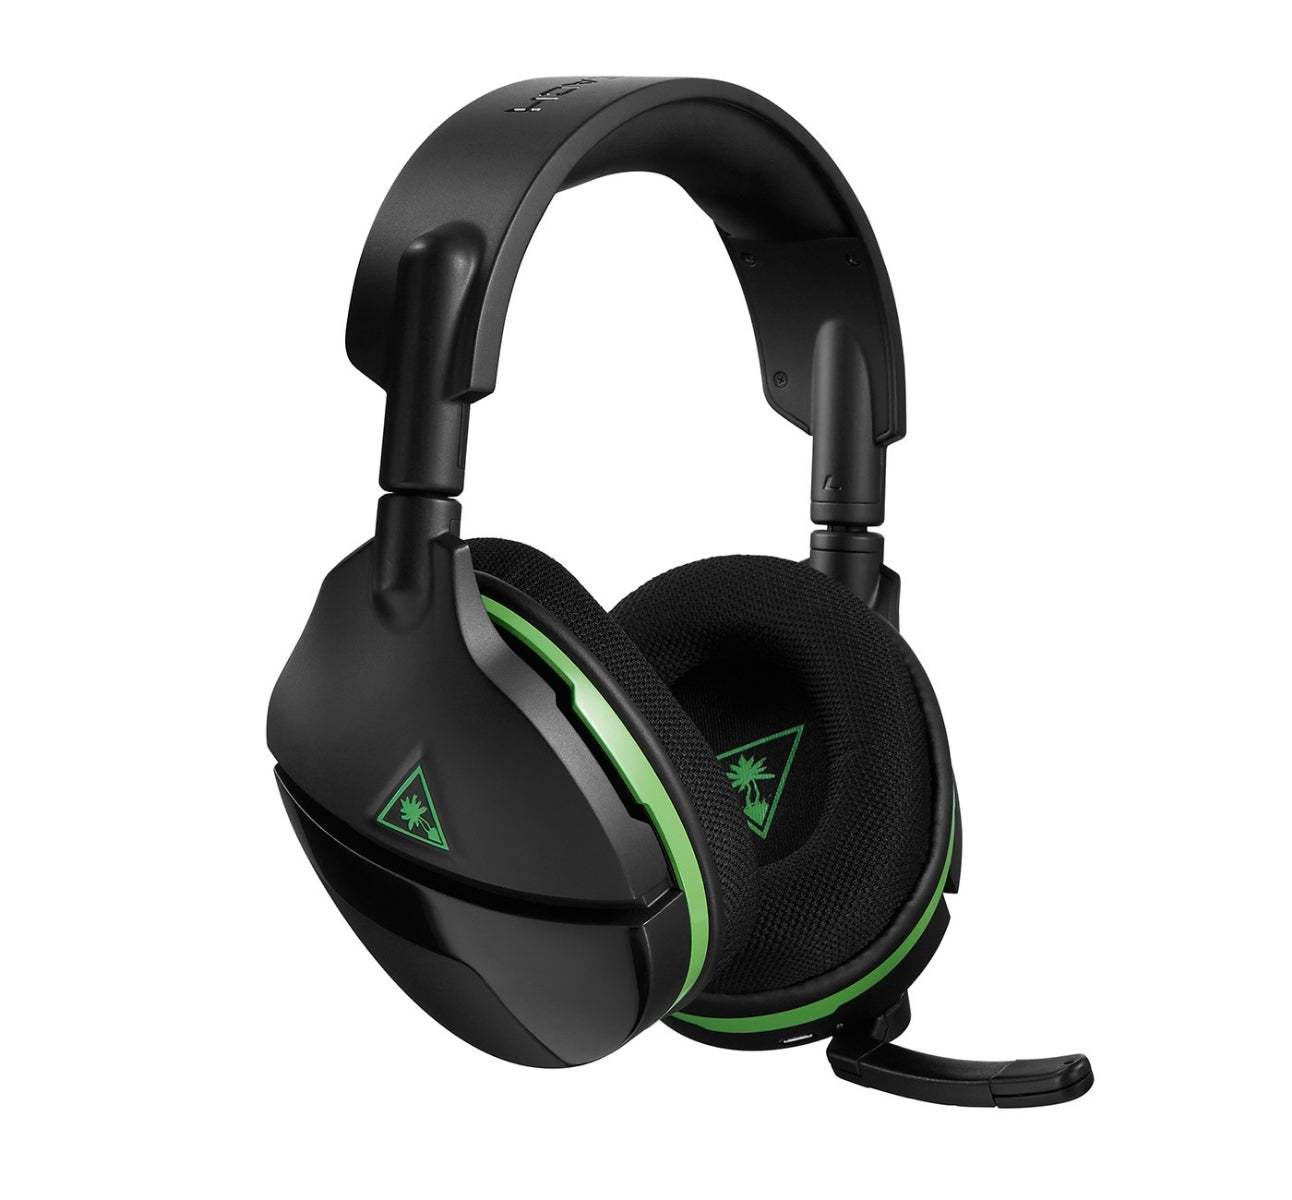 Turtle Beach Stealth 600 Sound Surround Gaming Xb Wireless Headset for